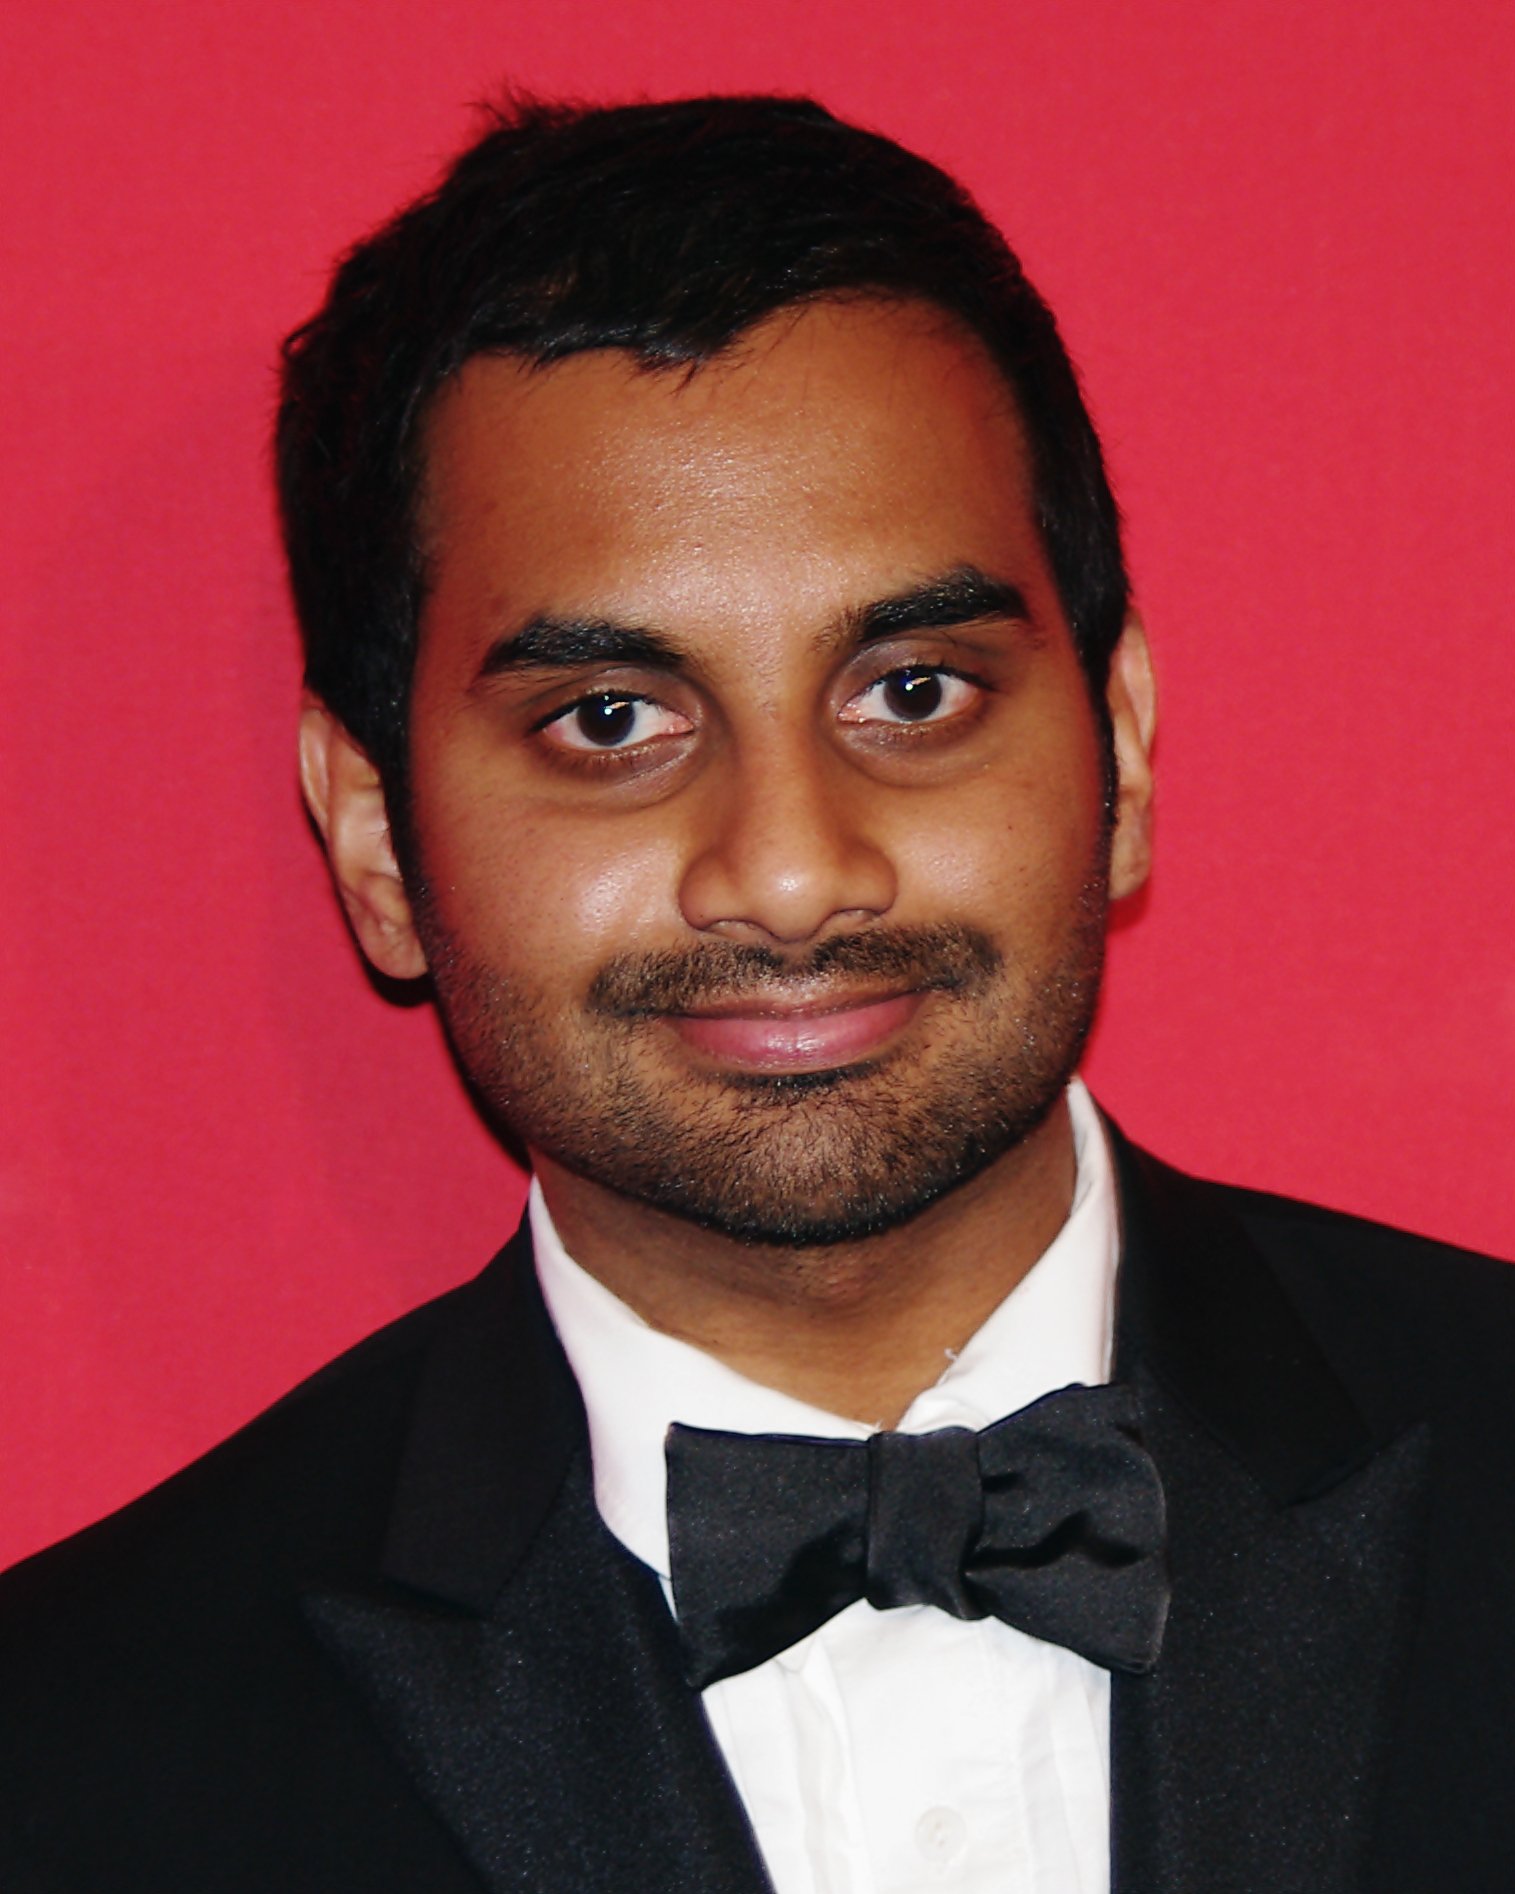 Comedian Aziz Ansari attends the TIME 100 Gala at Lincoln Center on April 24, 2012 | Photo by David Shankbone QS:P170,Q12899557, CC BY 3.0, Wikimedia Commons Images